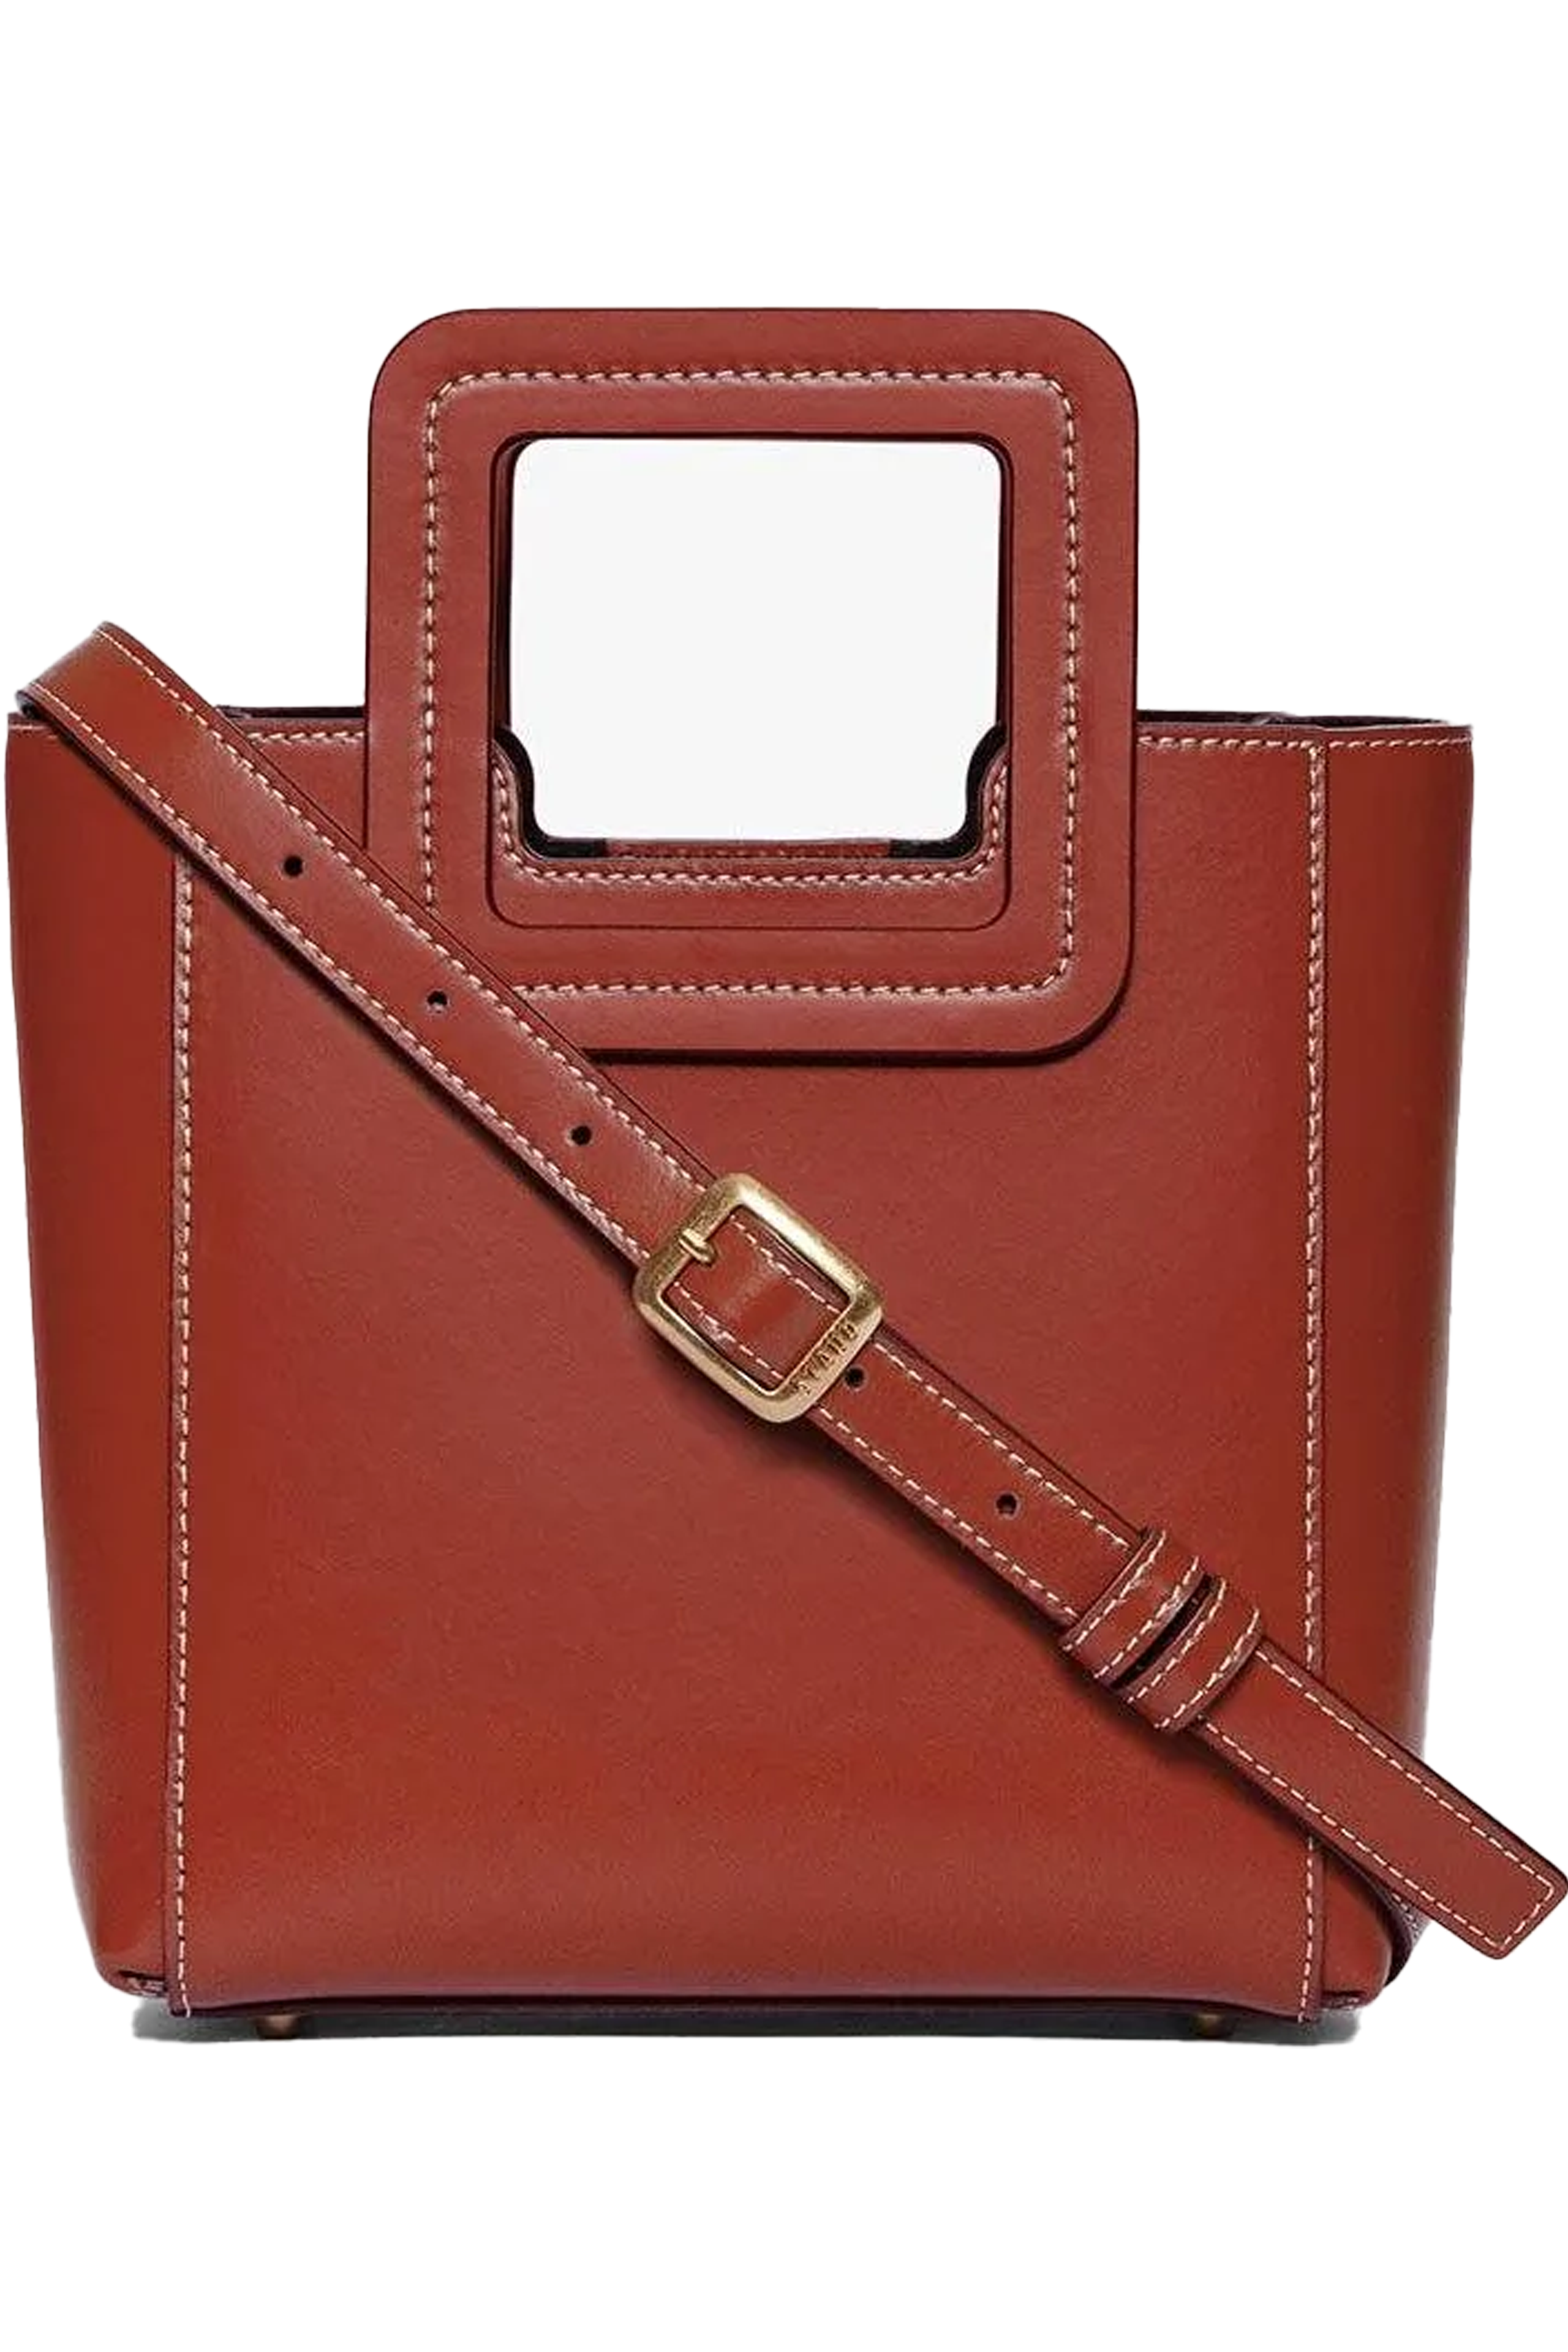 Staud SHIRLEY Mini Sherpa & Leather Bag Incl. Detachable Pouch Shoulder  Strap